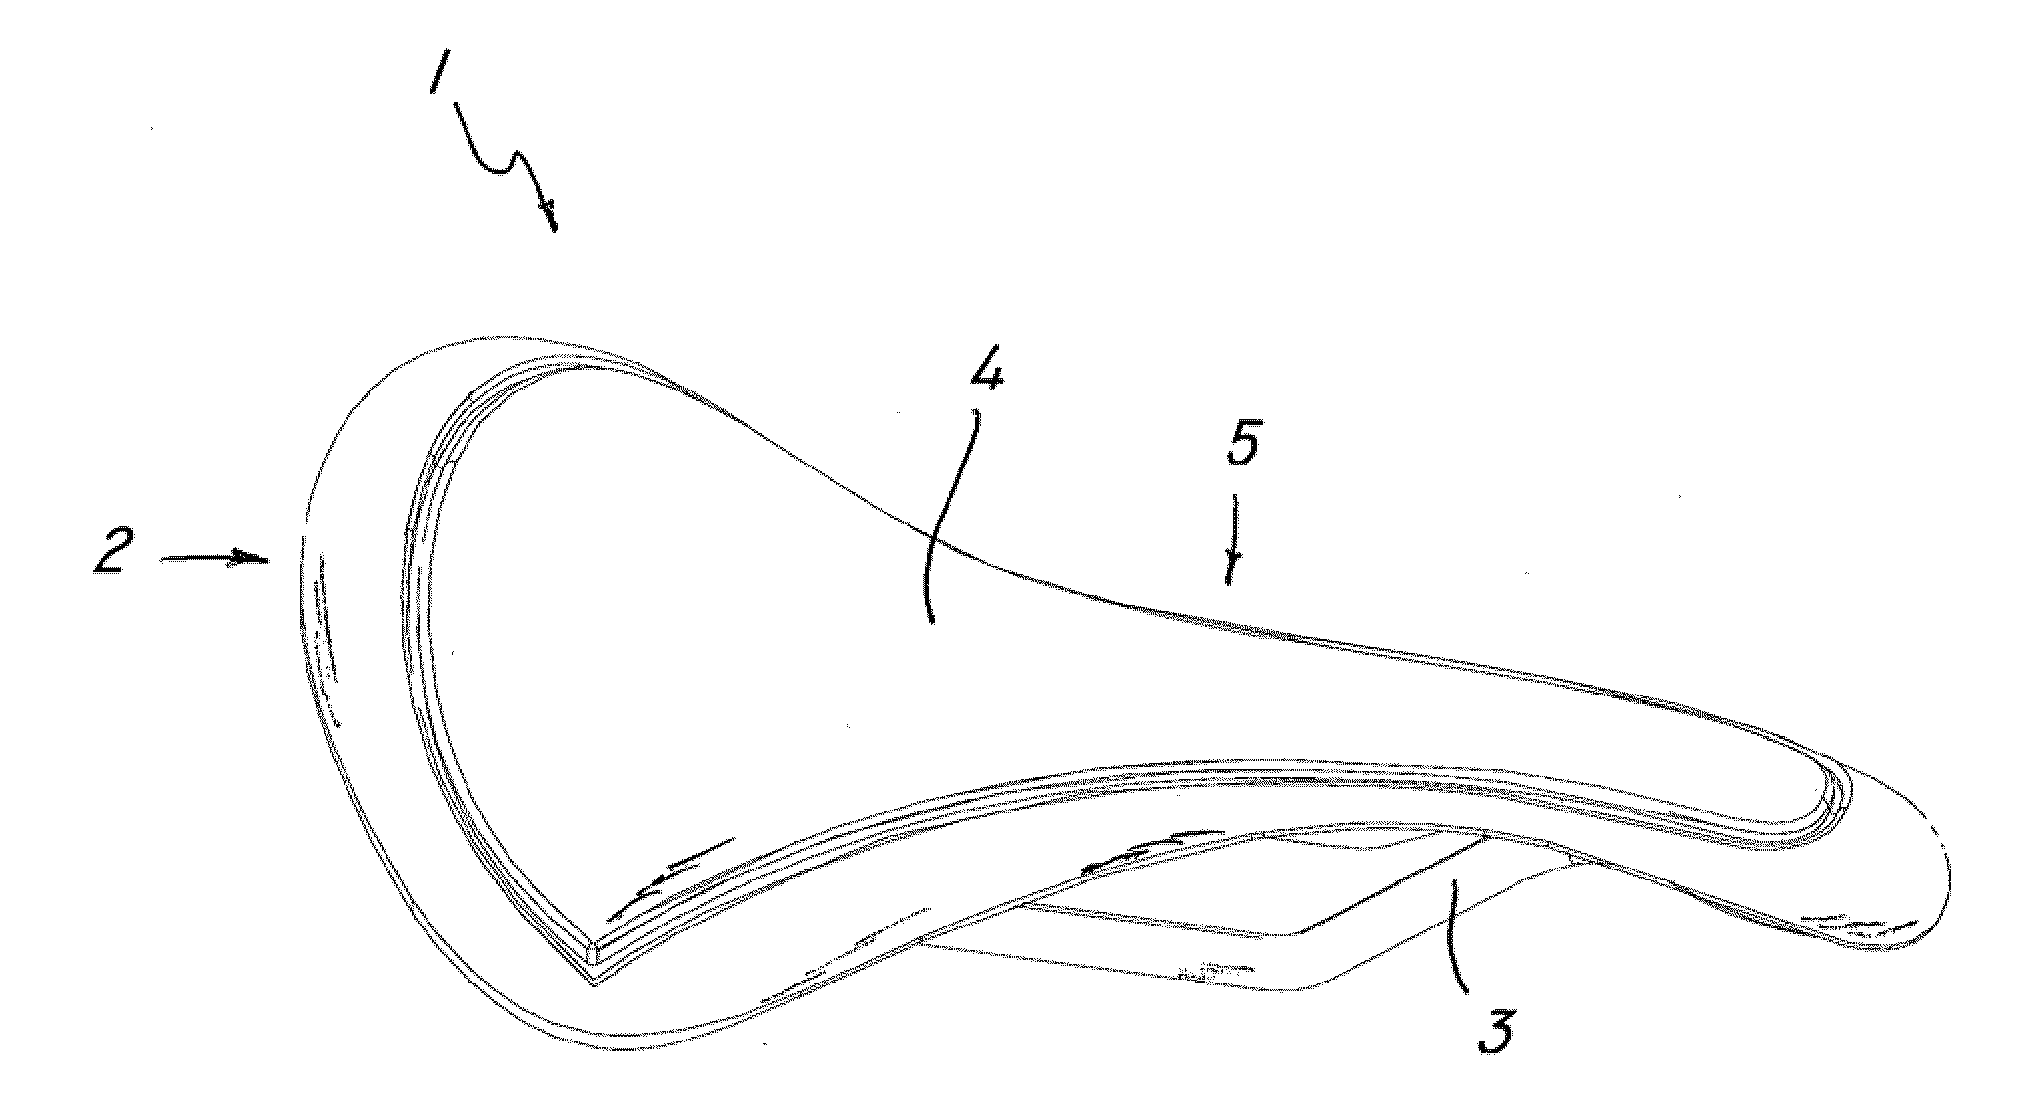 Human body supporting structure, particularly bicycle saddle and method of making same